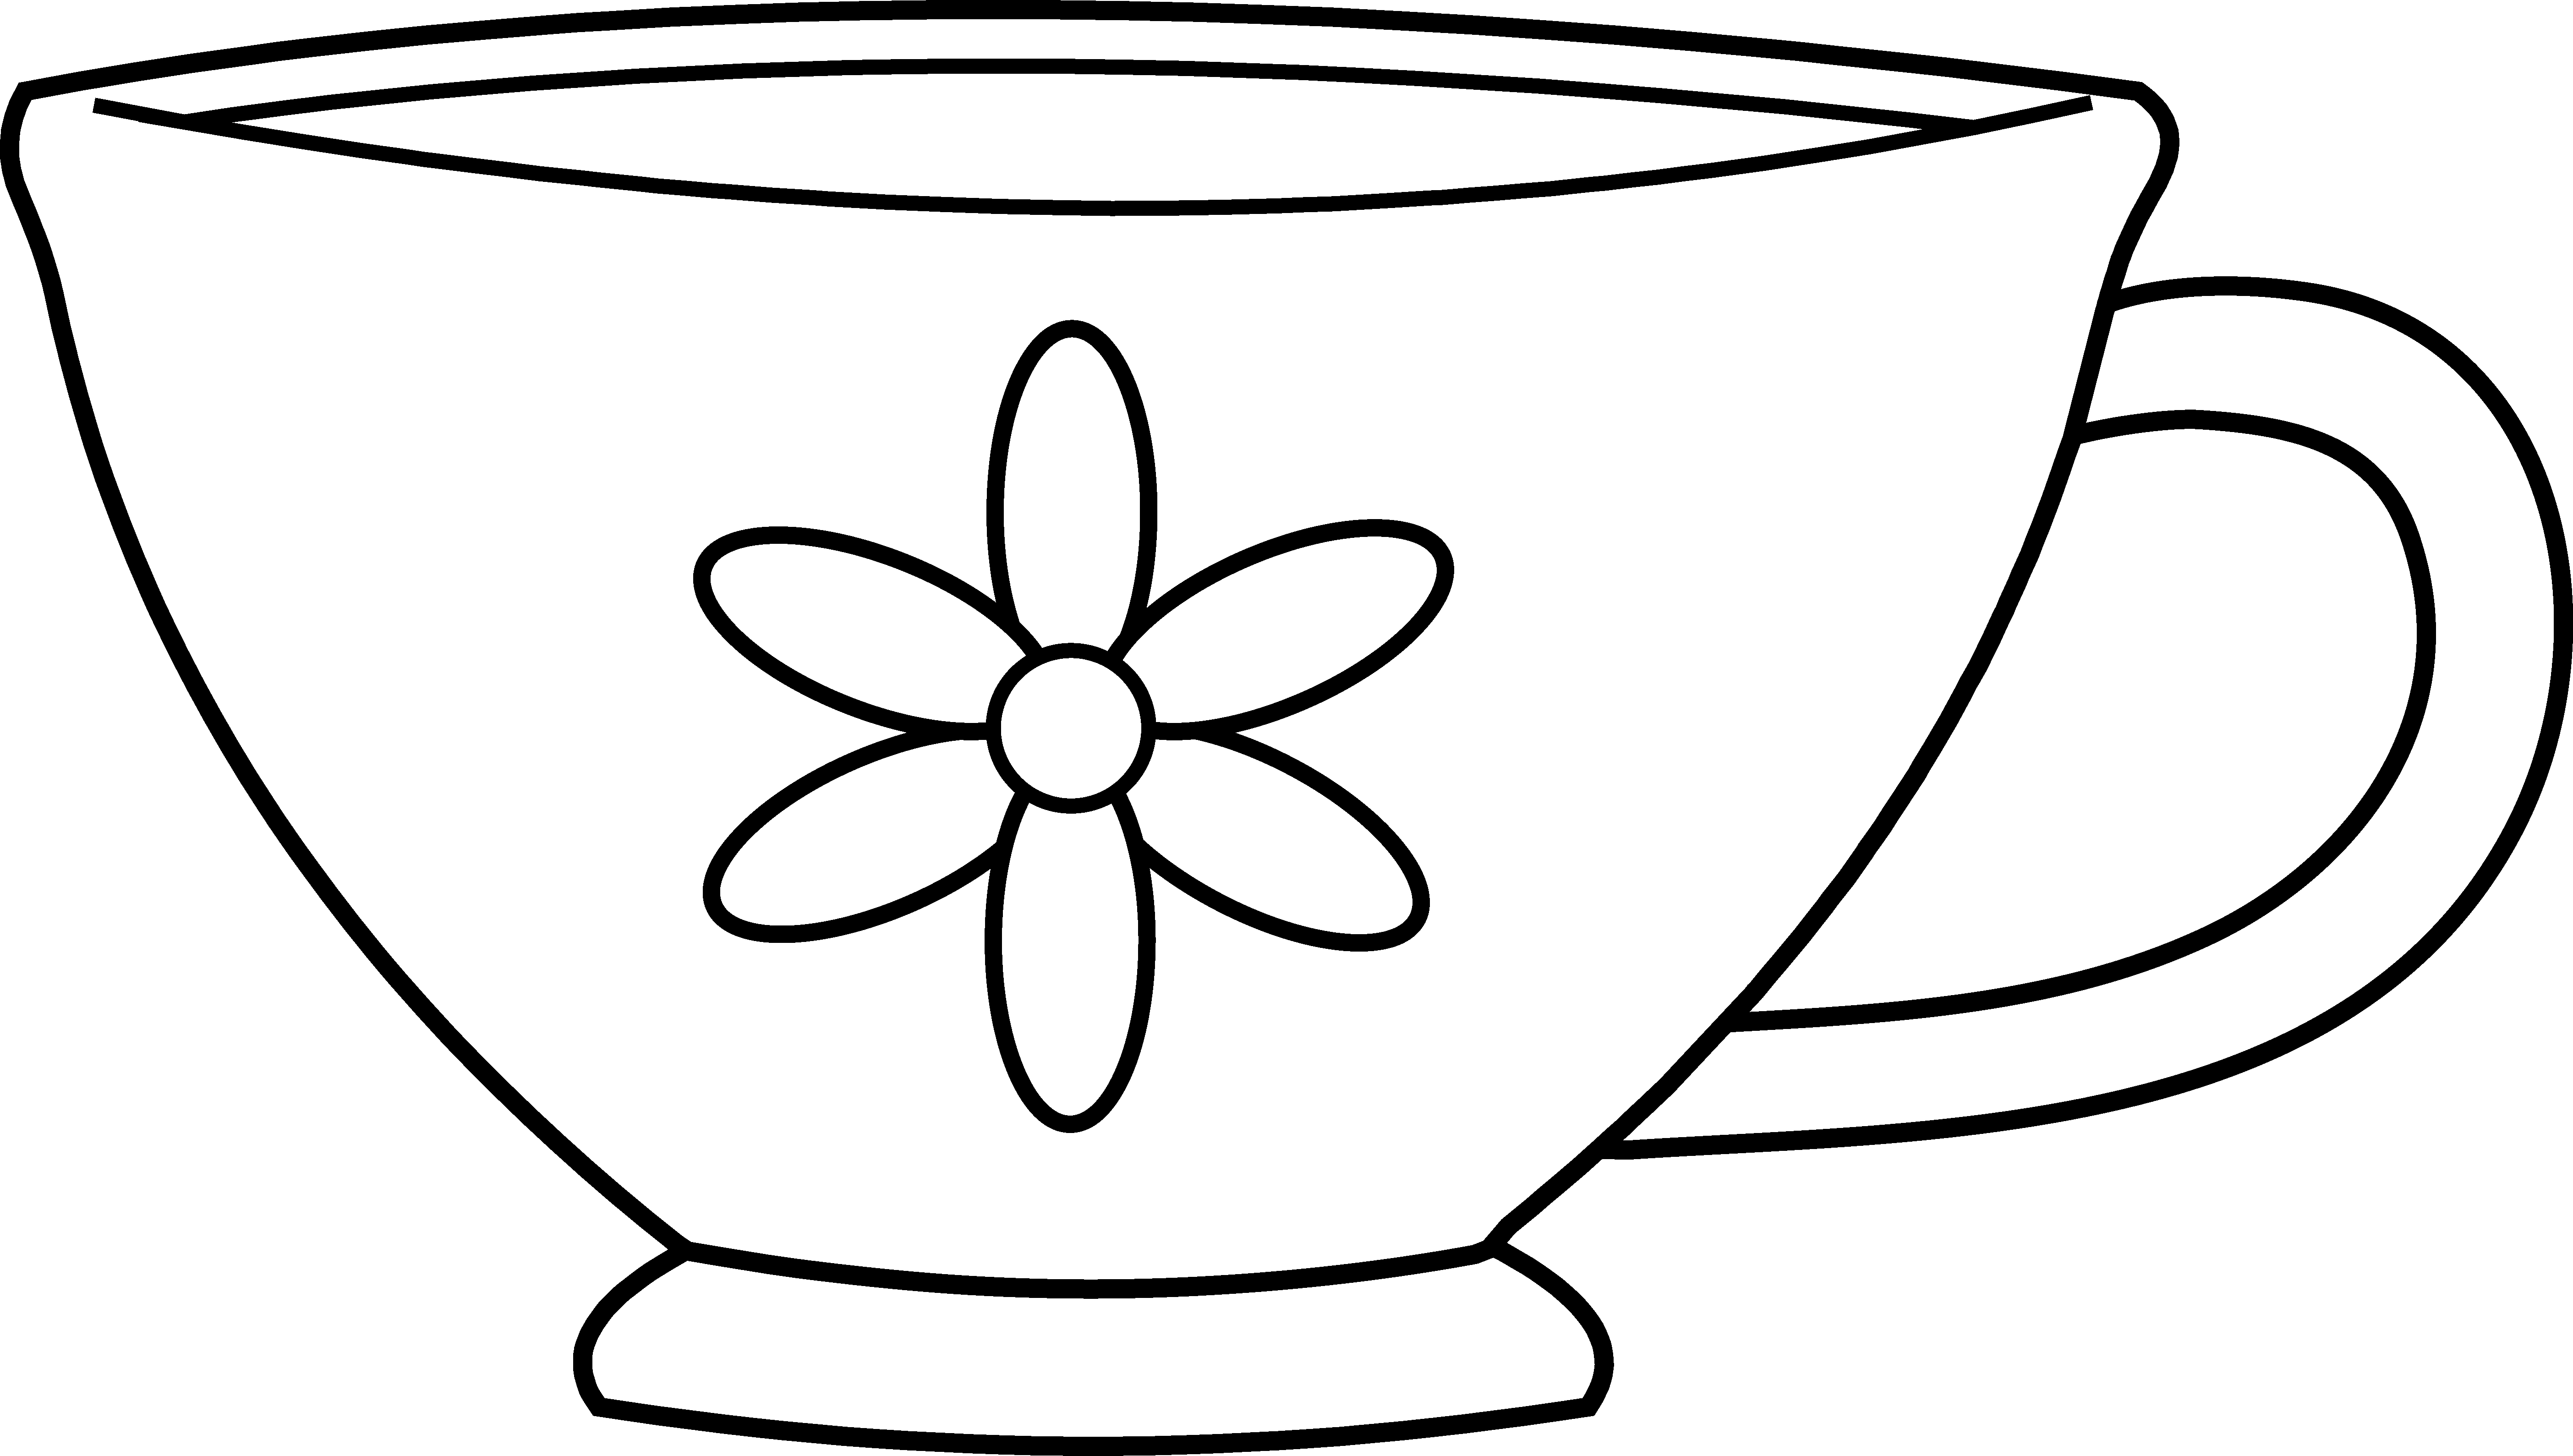 Teacup Coloring Pages Printable - High Quality Coloring Pages